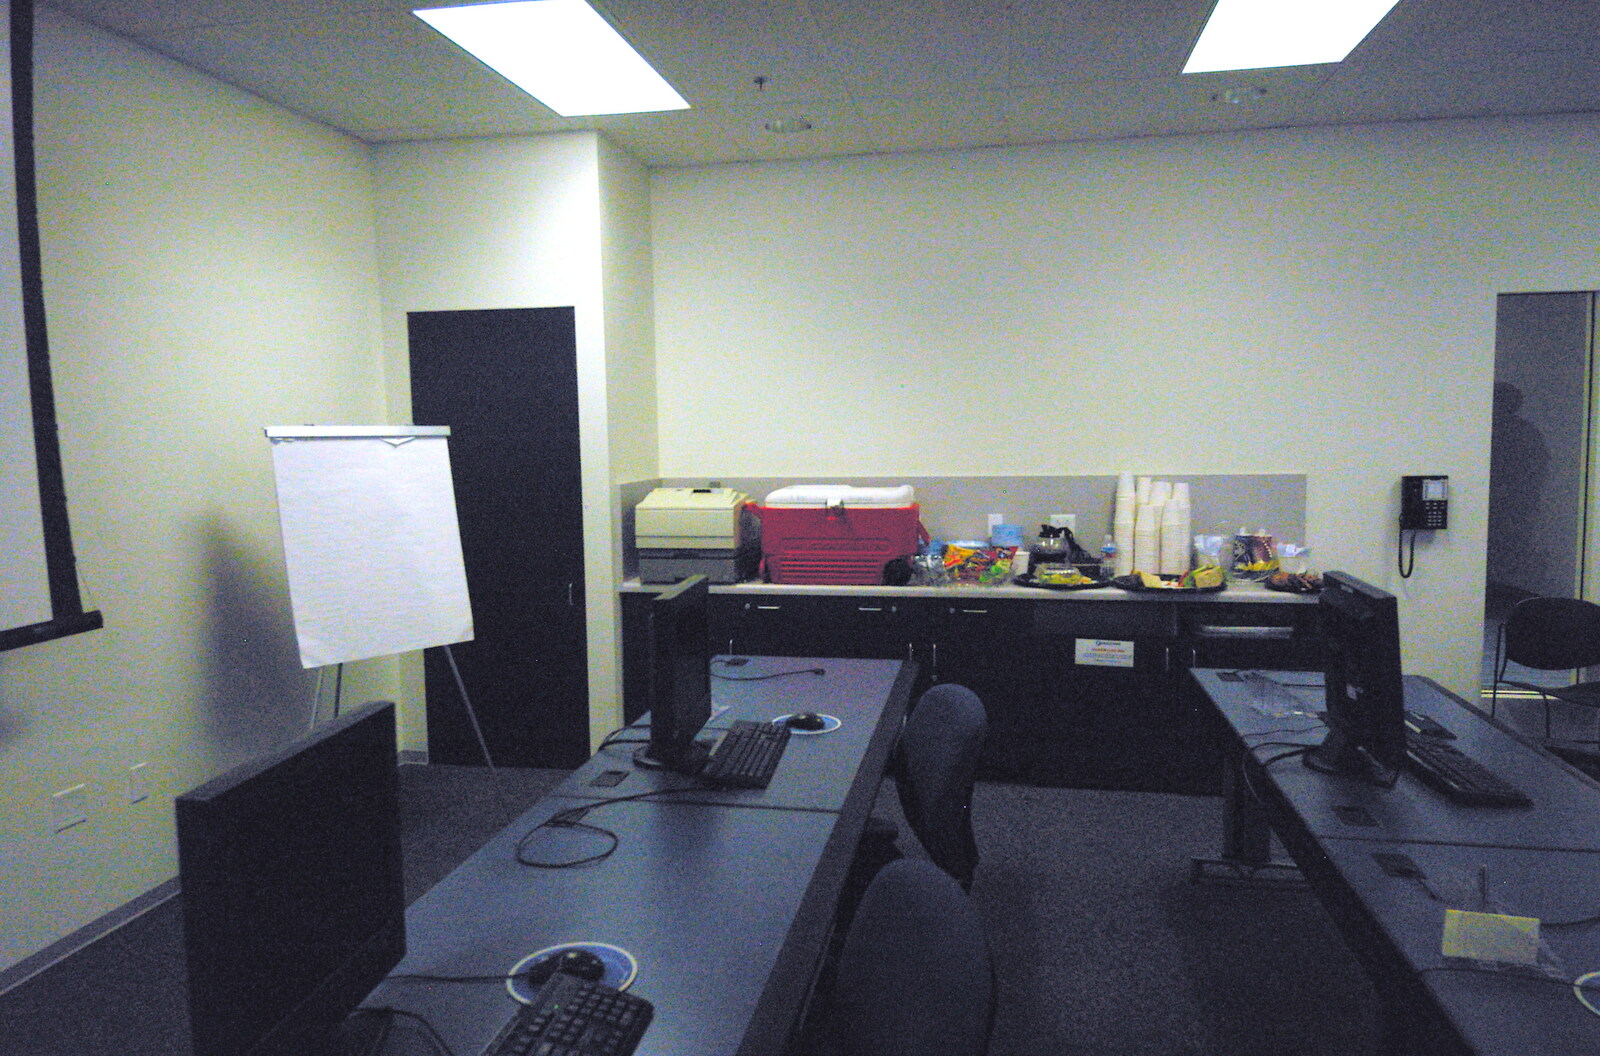 One of the Qualcomm meeting rooms from San Diego Four, California, US - 22nd September 2005